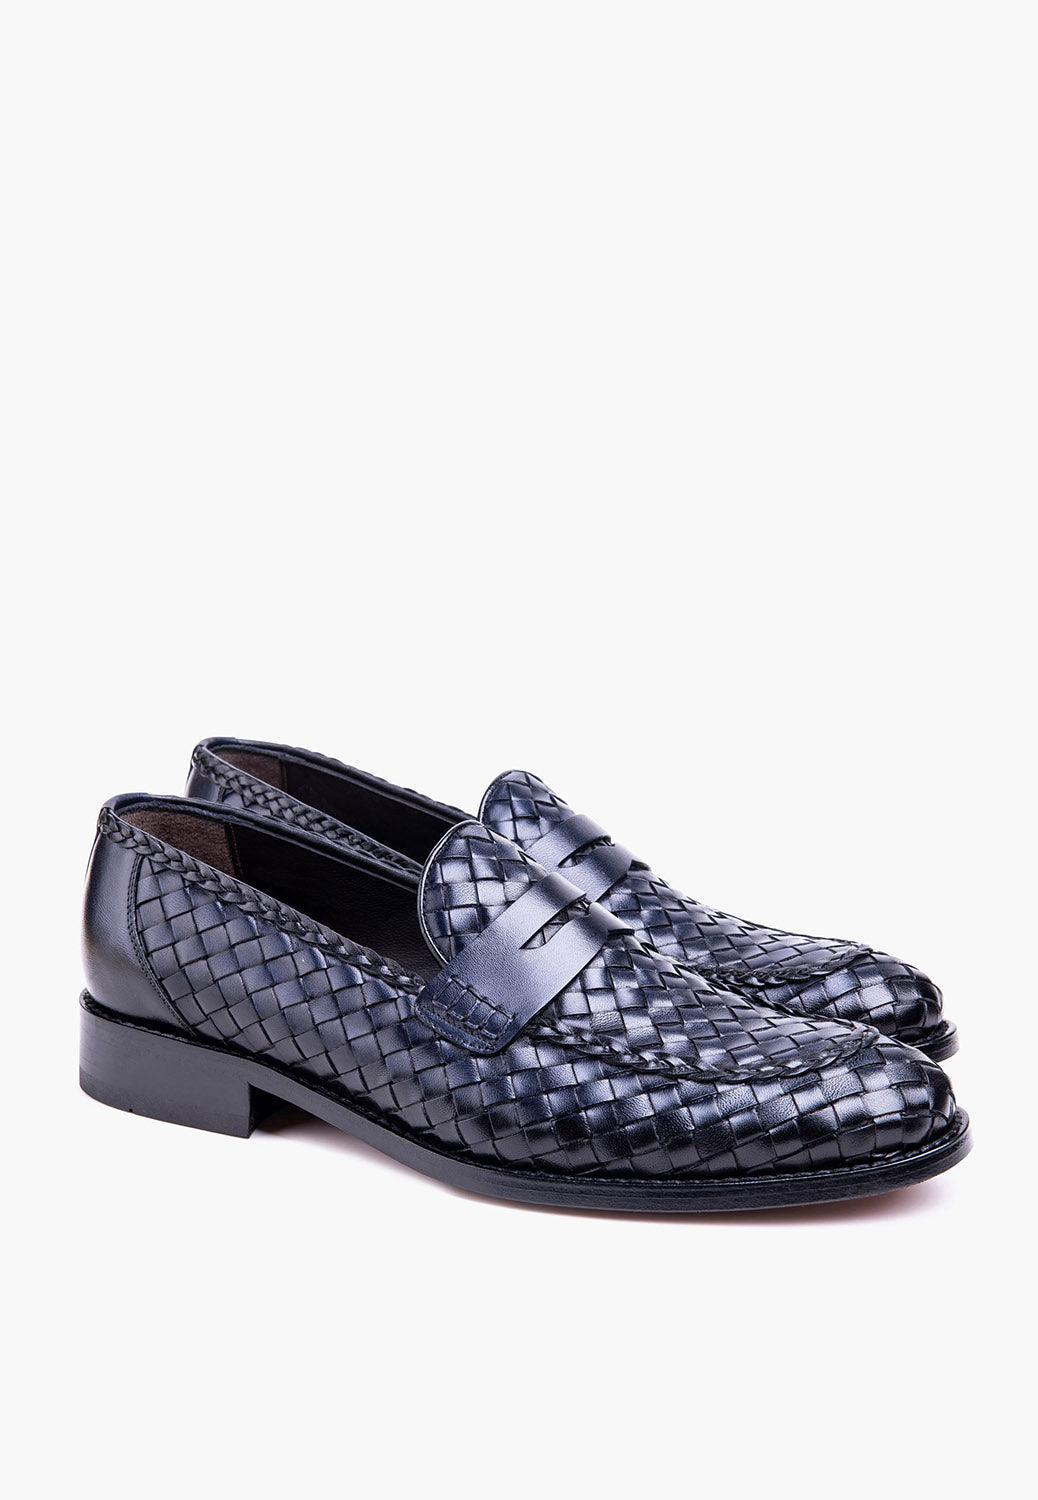 Miami Loafer Navy - SEPOL Shoes